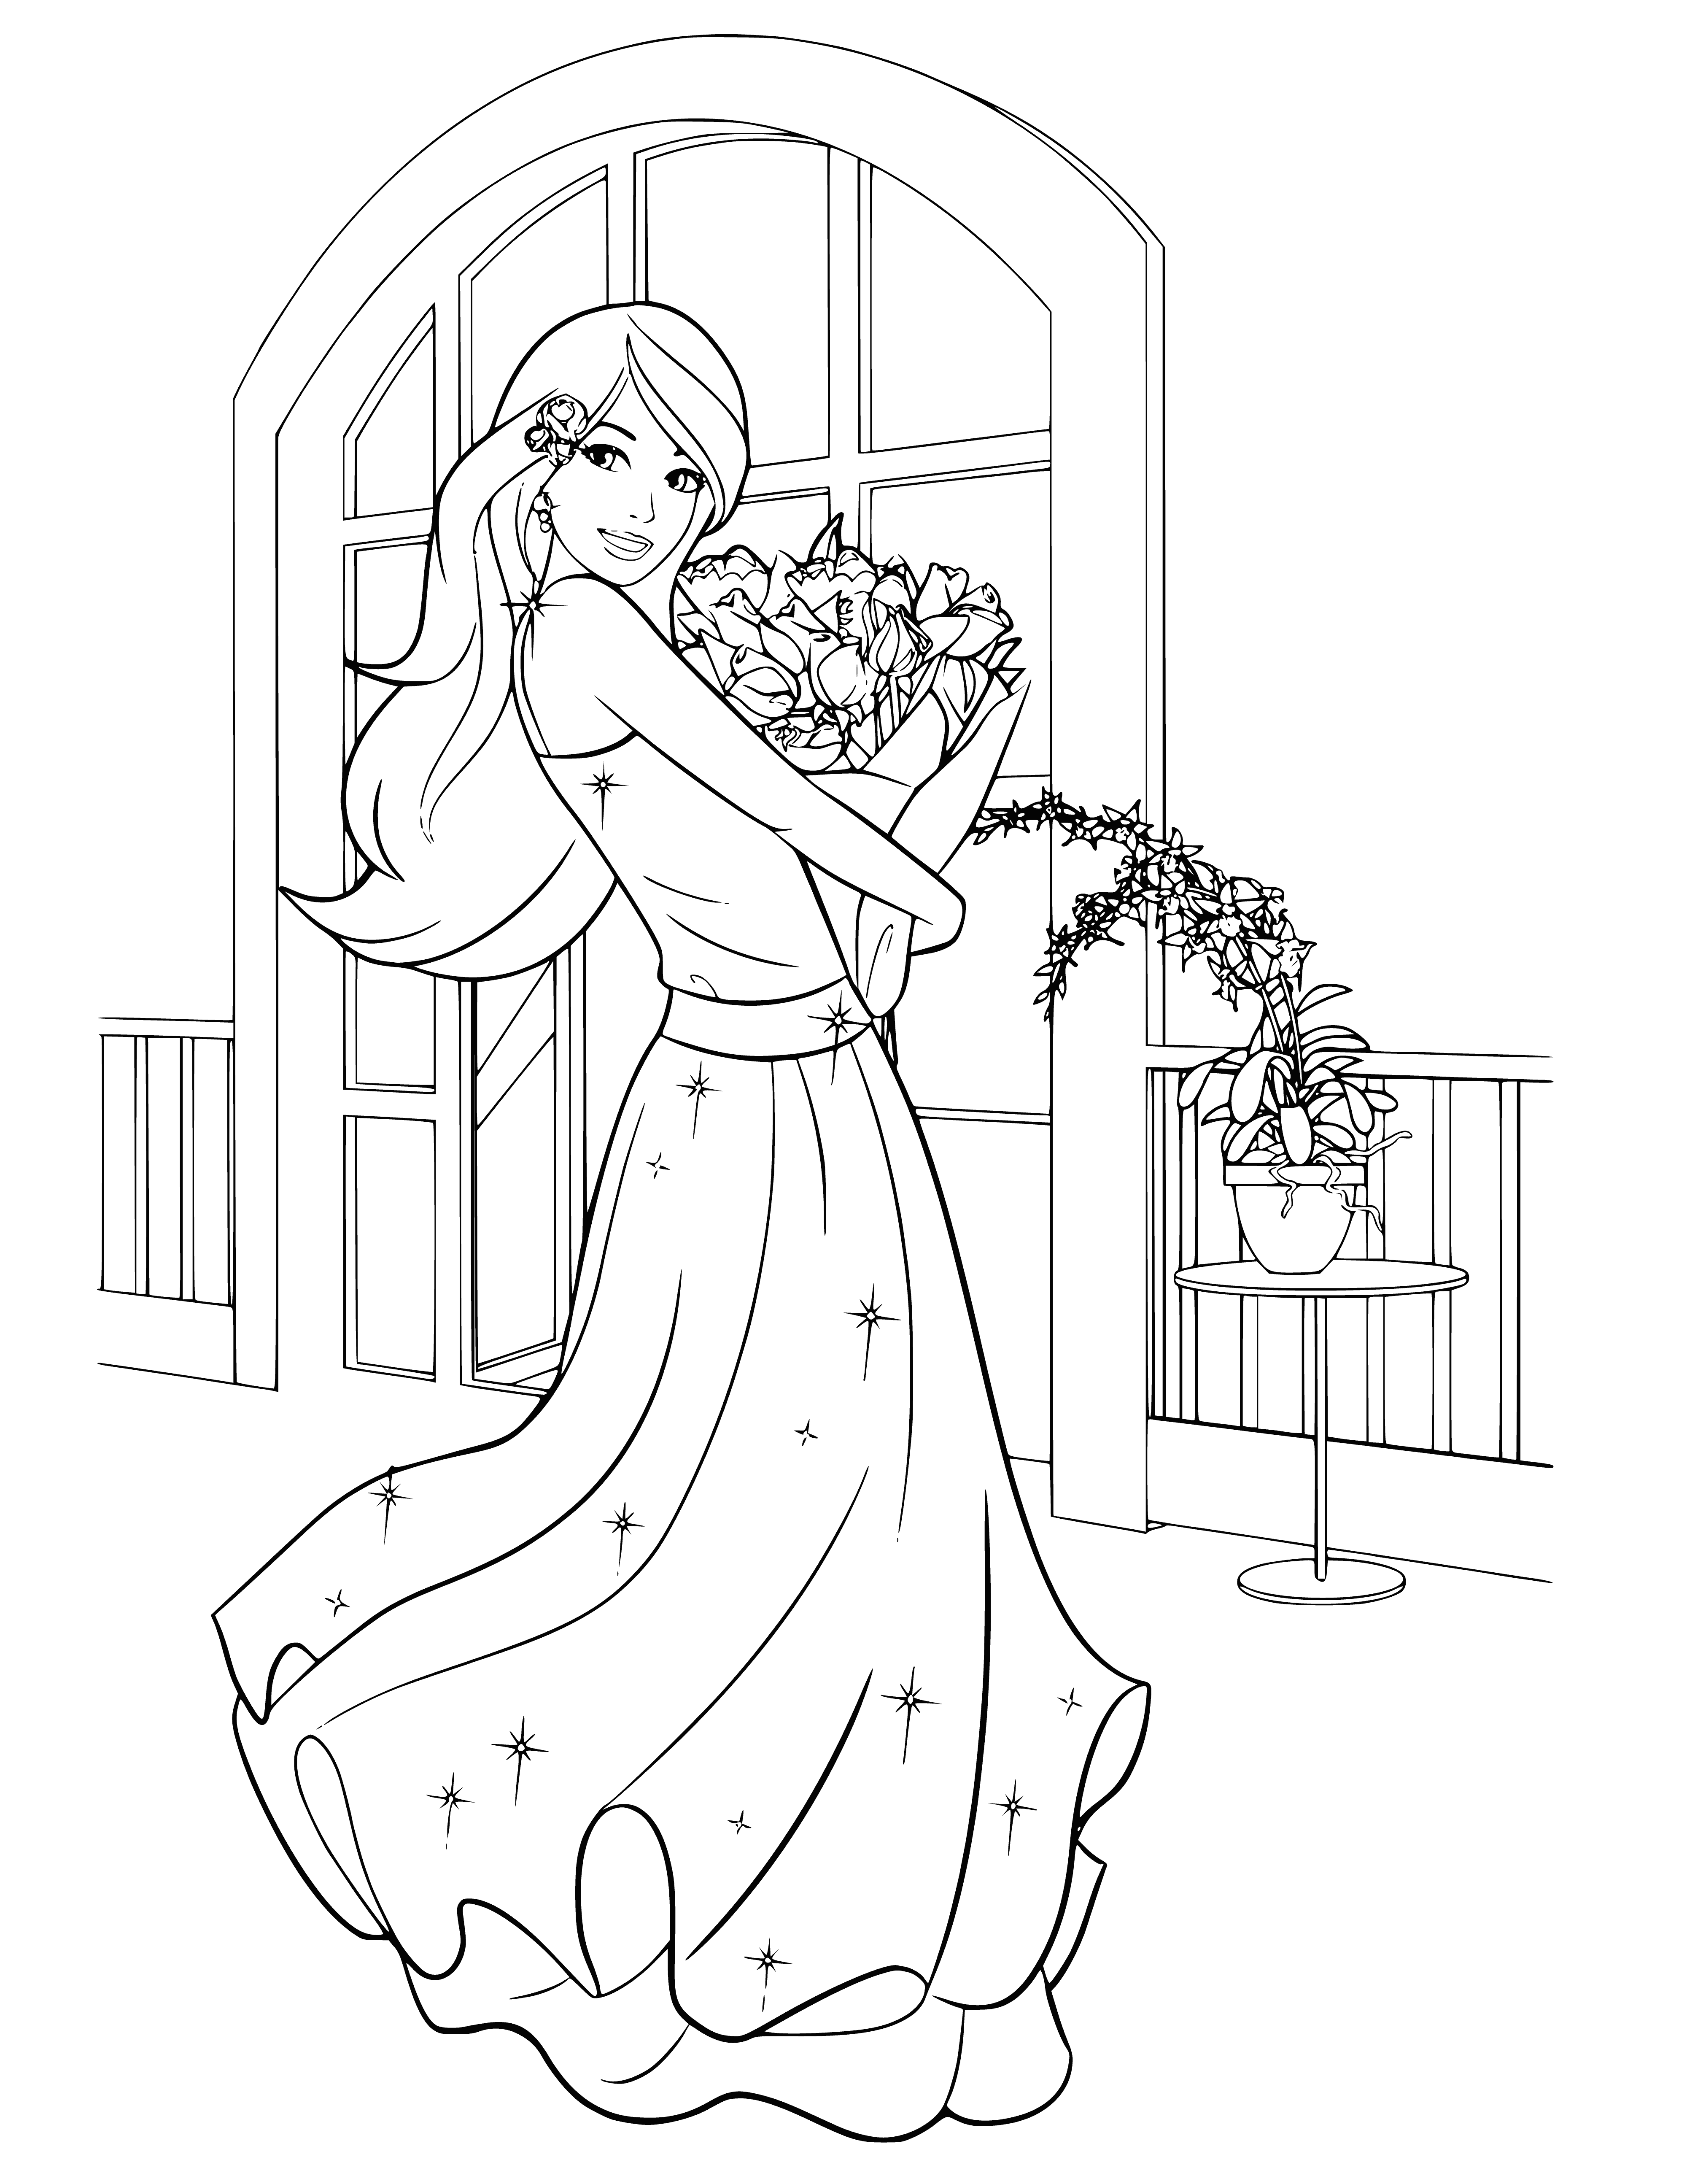 coloring page: Barbie beaming with a big bouquet of flowers in her hands, dressed in pink and with an updo of loose curls. #BarbieLove